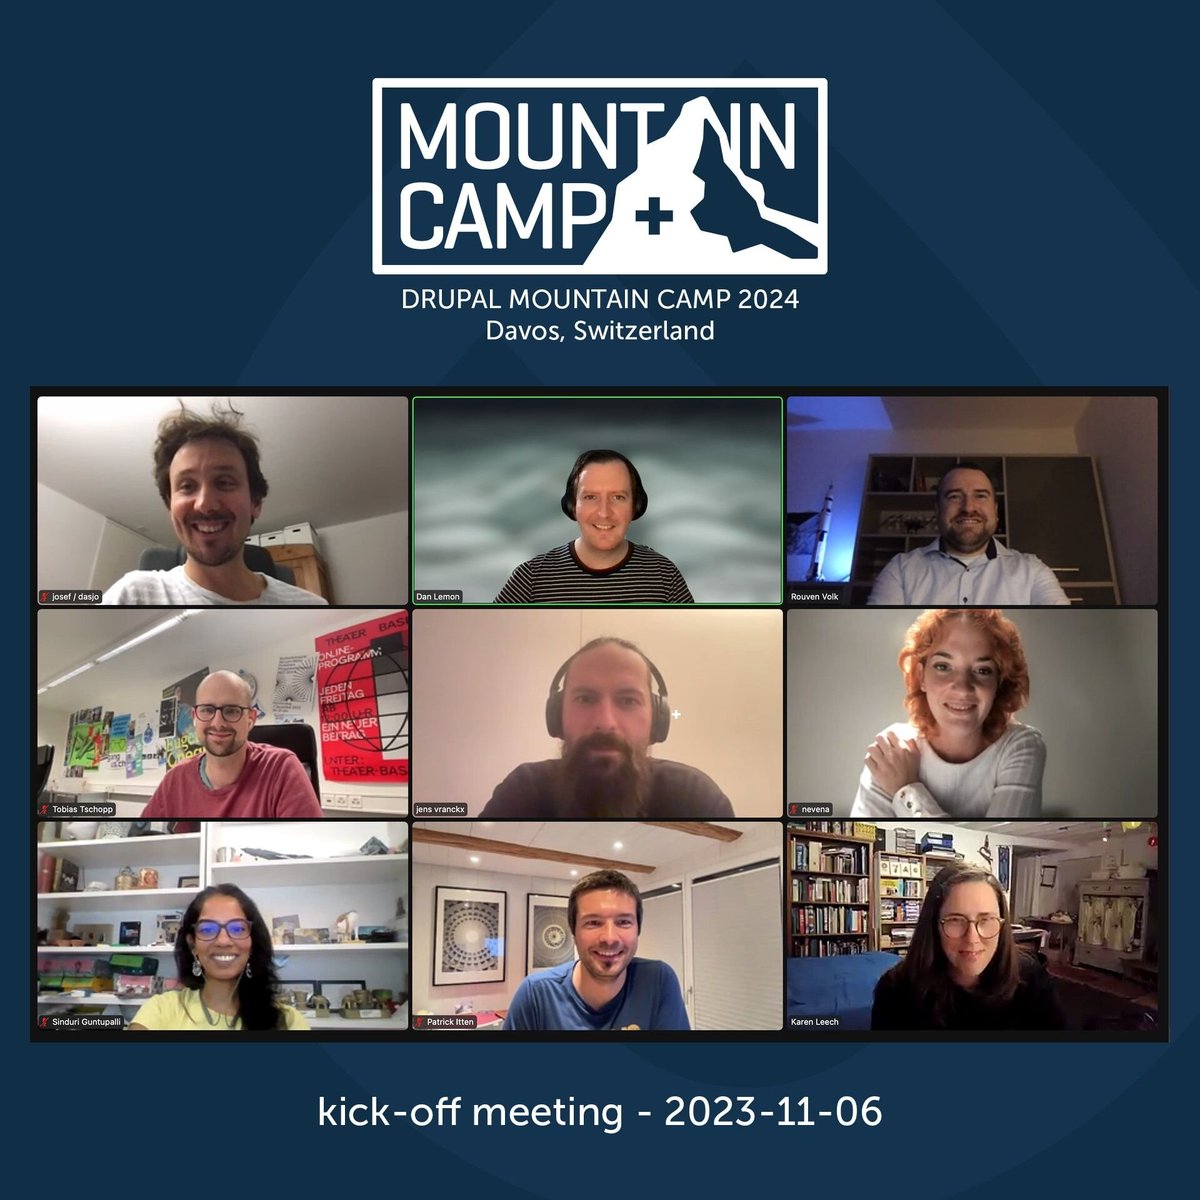 The organisation team had their first kick-off meeting yesterday. We started with an ice-breaker, then discussed the various roles, and potential ideas for the camp. We're all excited to welcome you in Davos from March 7th - 10th 2024. #DrupalMountainCamp #Drupal #OpenSource 🇨🇭